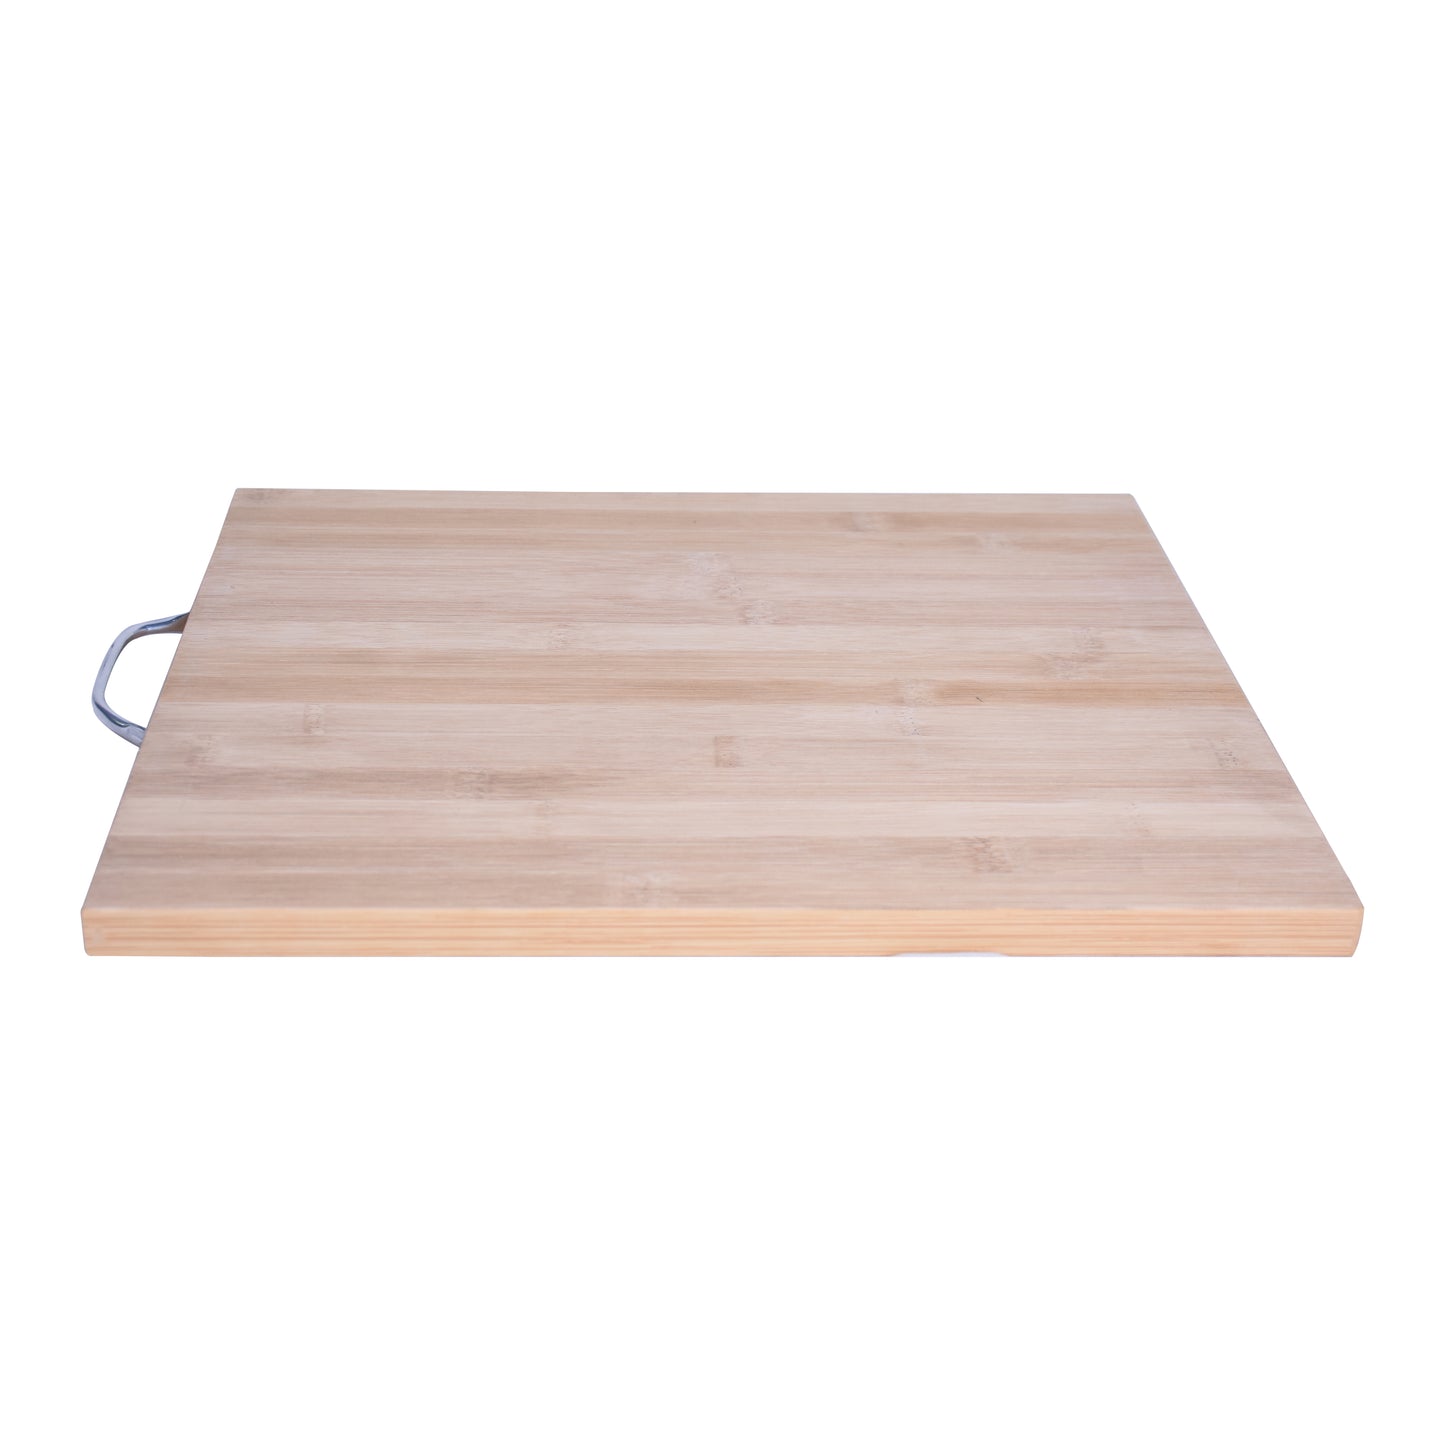 Vegetable Meat Wooden Cutting Chopping Board 31.5 x 21.5cm